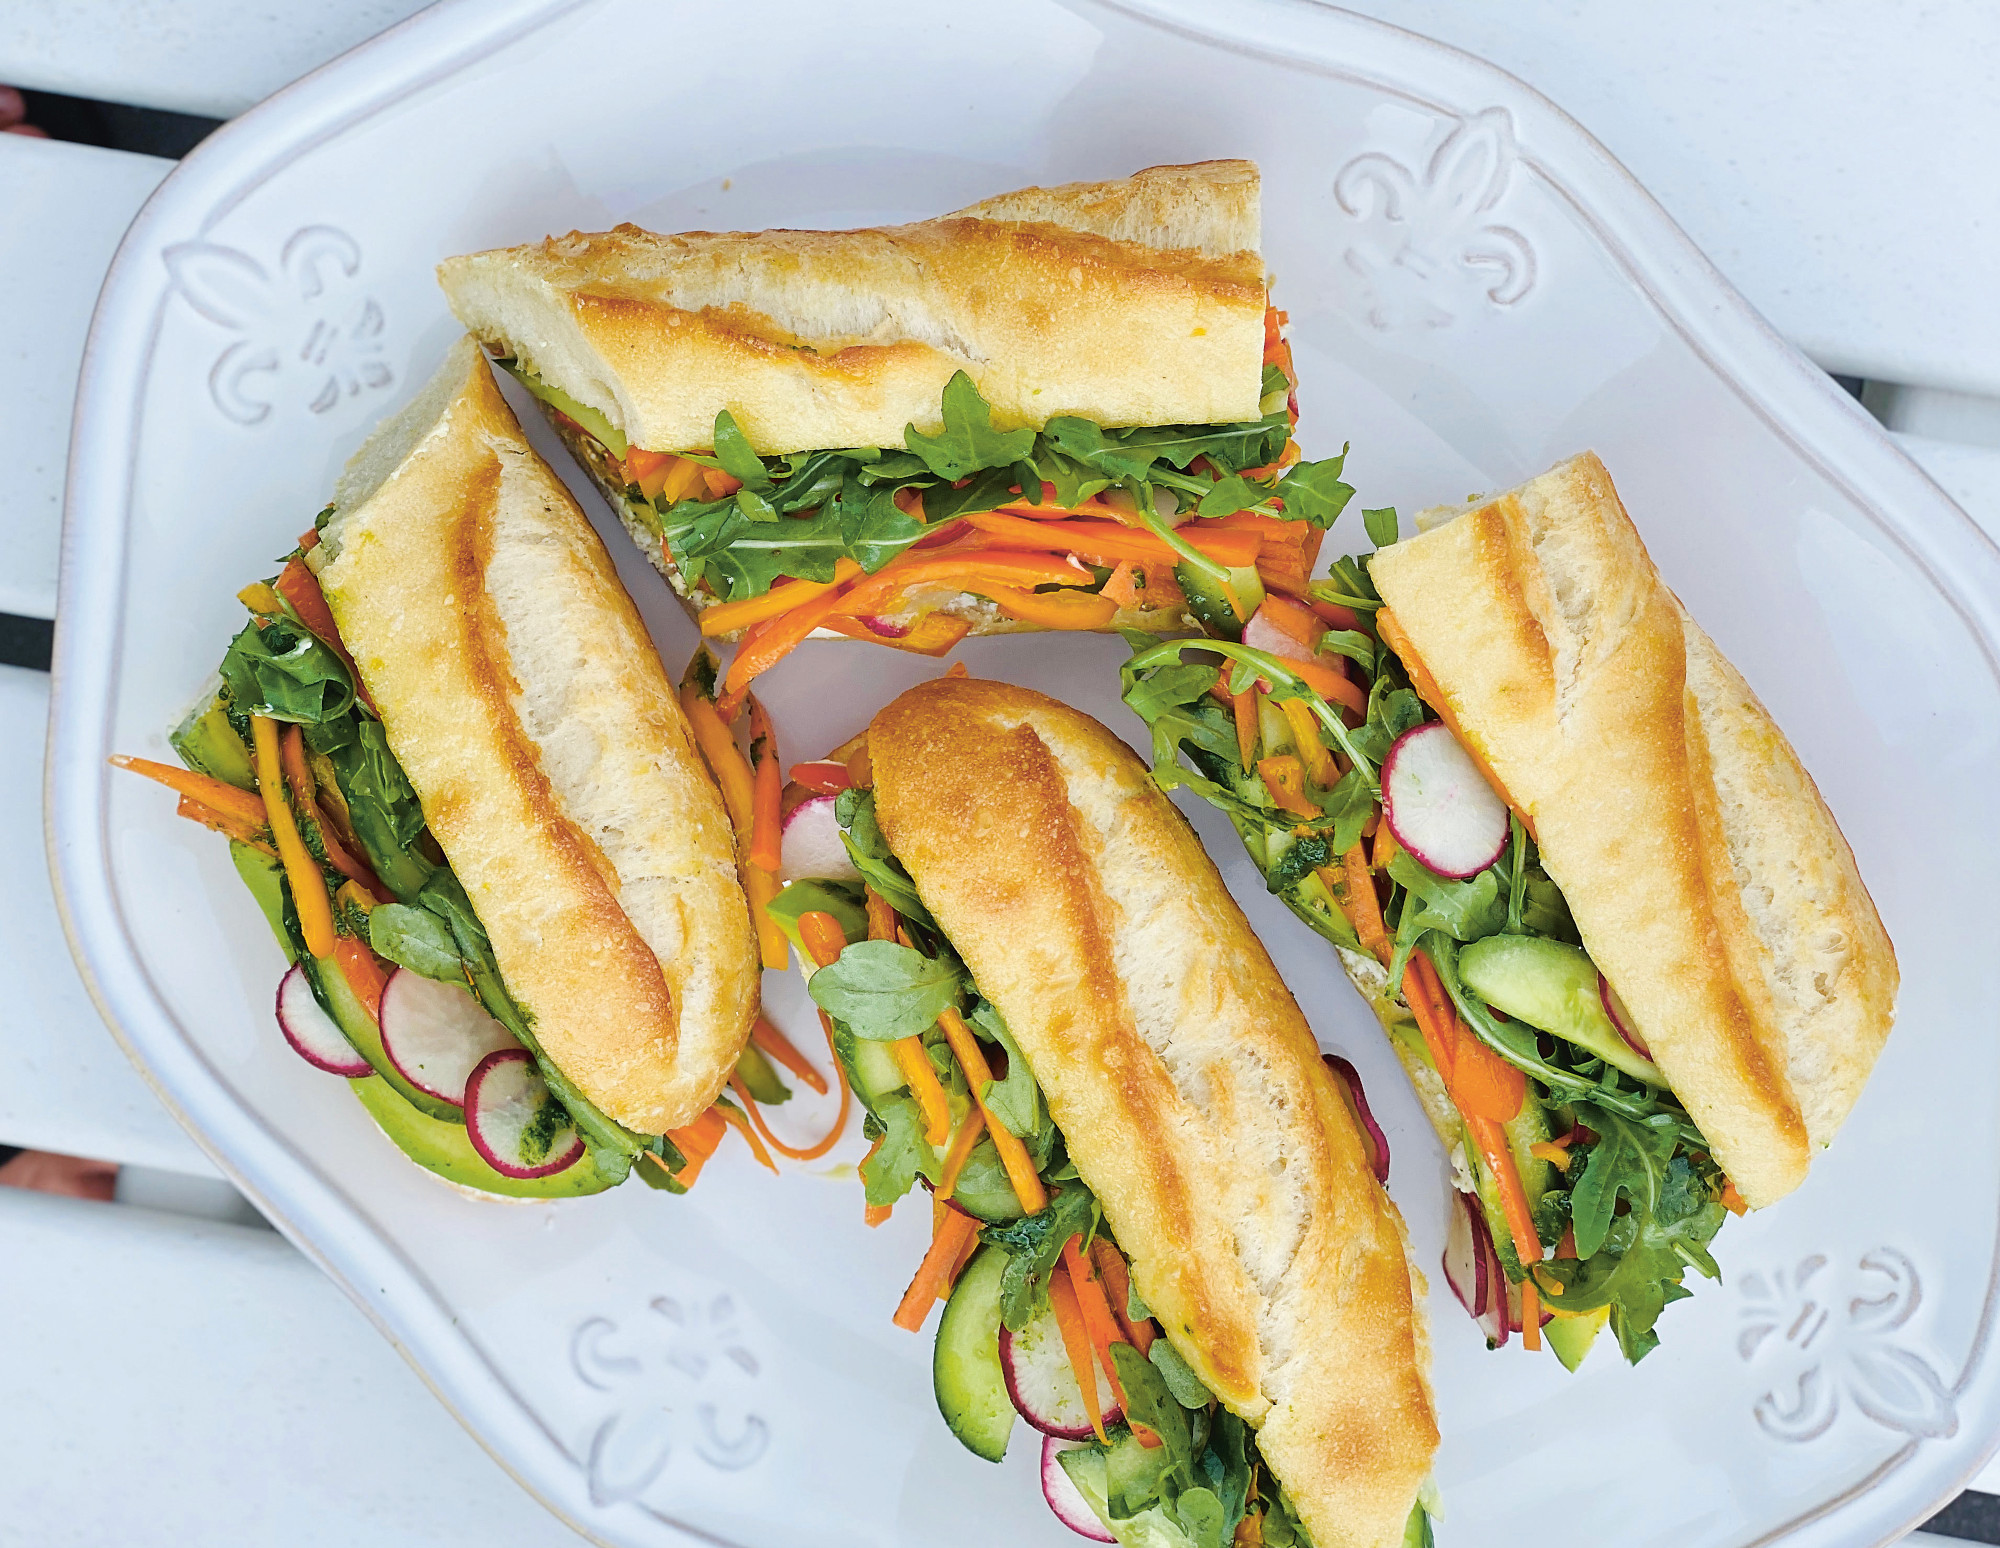 Vegetable Pistou Sandwiches, Suzanne Goin and David Lentz. Photo courtesy of the chefs